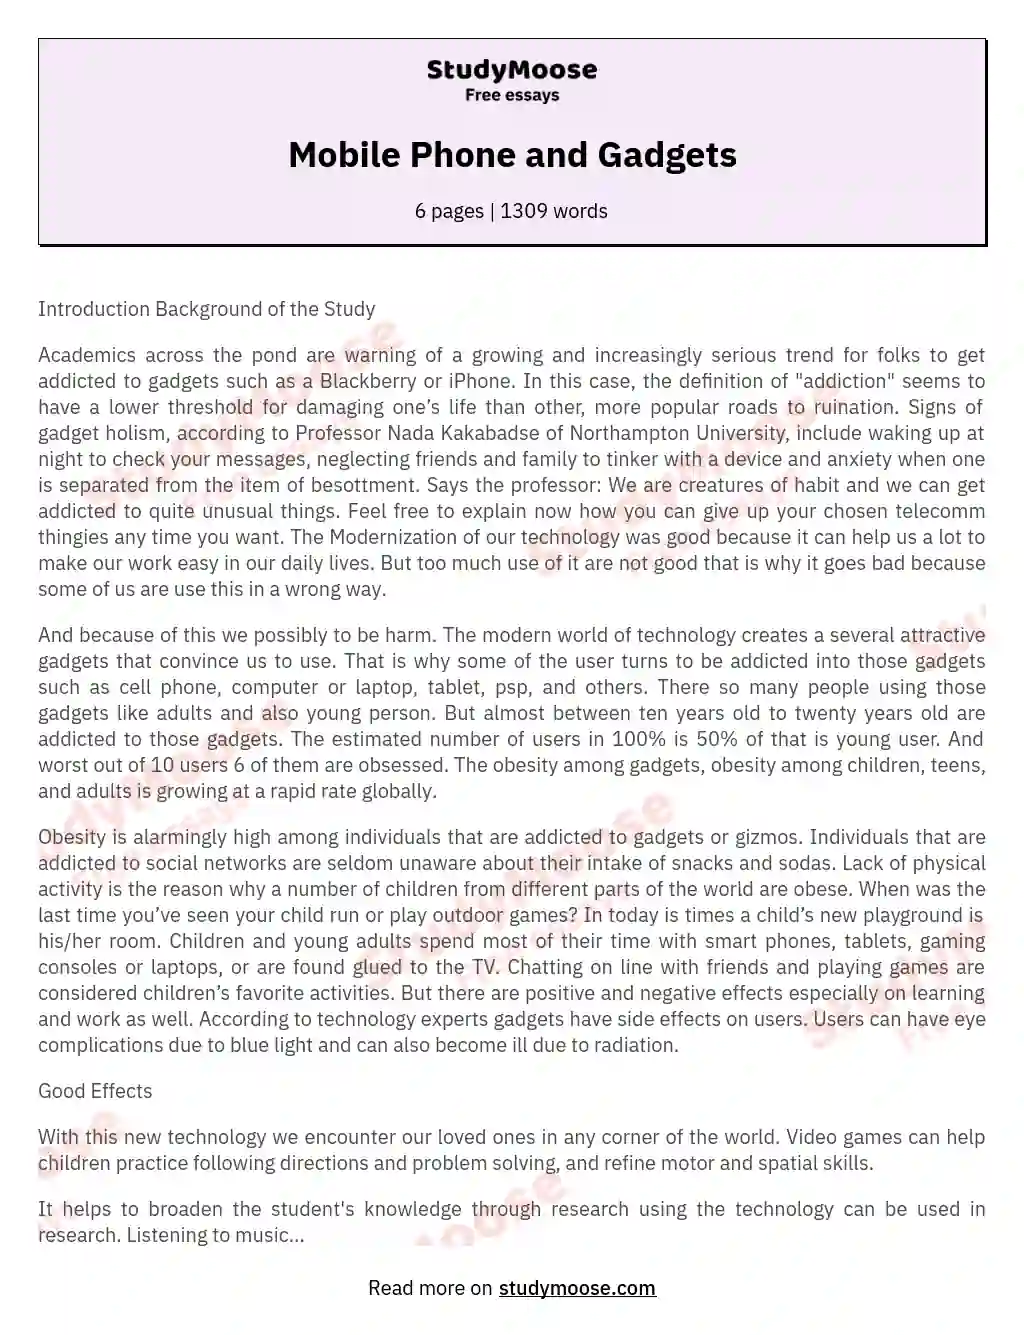 persuasive essay about using gadgets